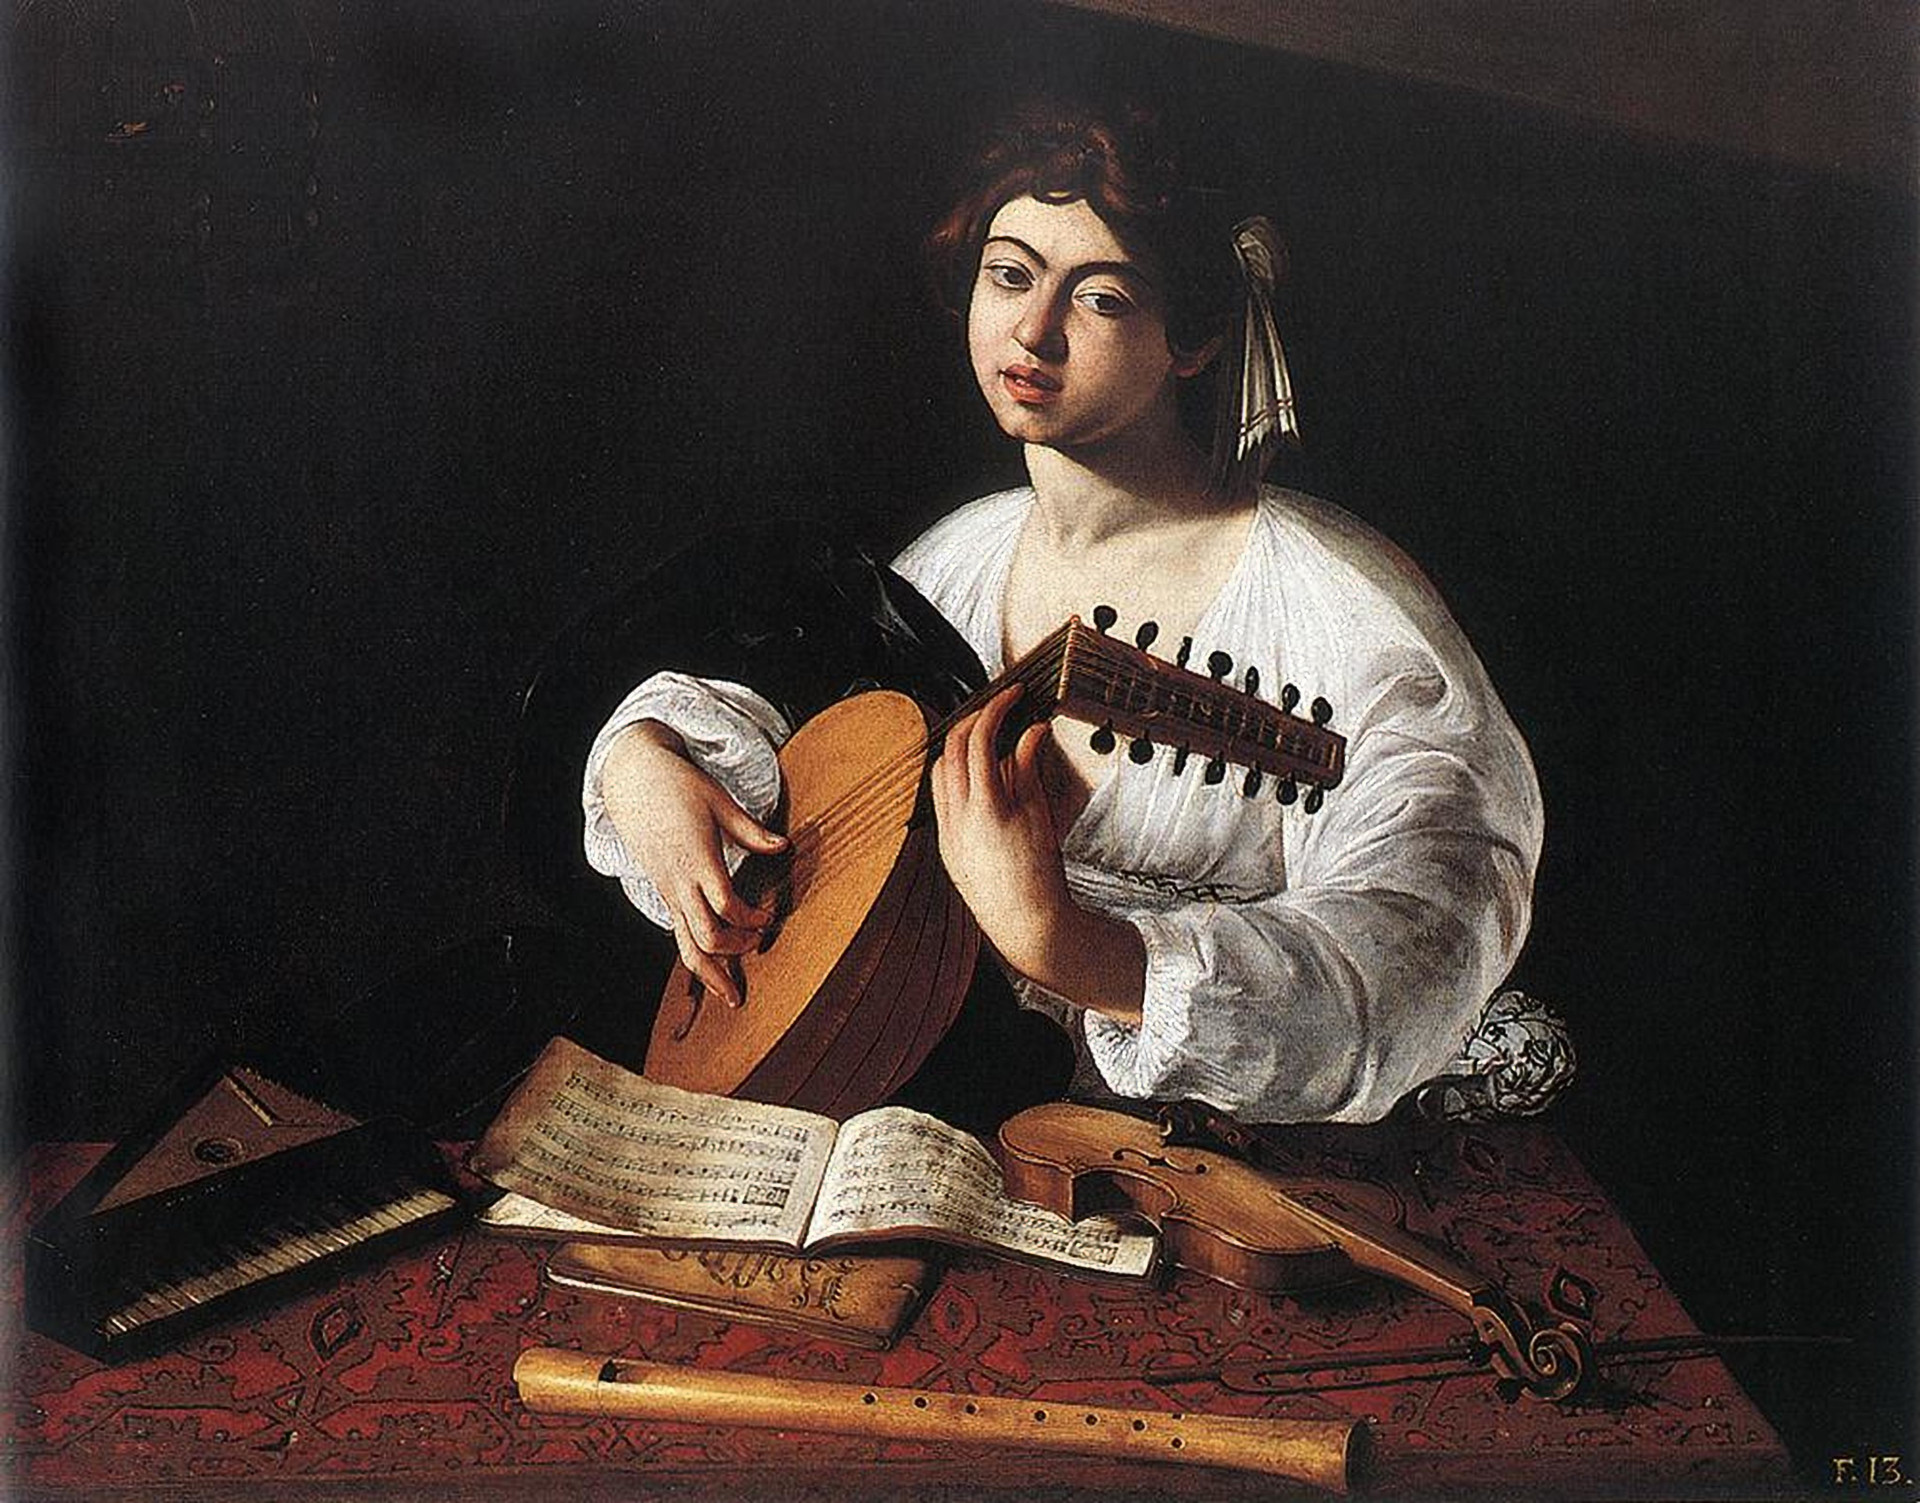 <p>For a prolonged period, it was believed that the individual in this Caravaggio artwork represented a female. It wasn't until the early 20th century that art critics comprehended that it portrays a youthful male engaging in the masculine activity of playing a lute. This perception was influenced by the contemporary societal views on the instrument's association with masculinity.</p>